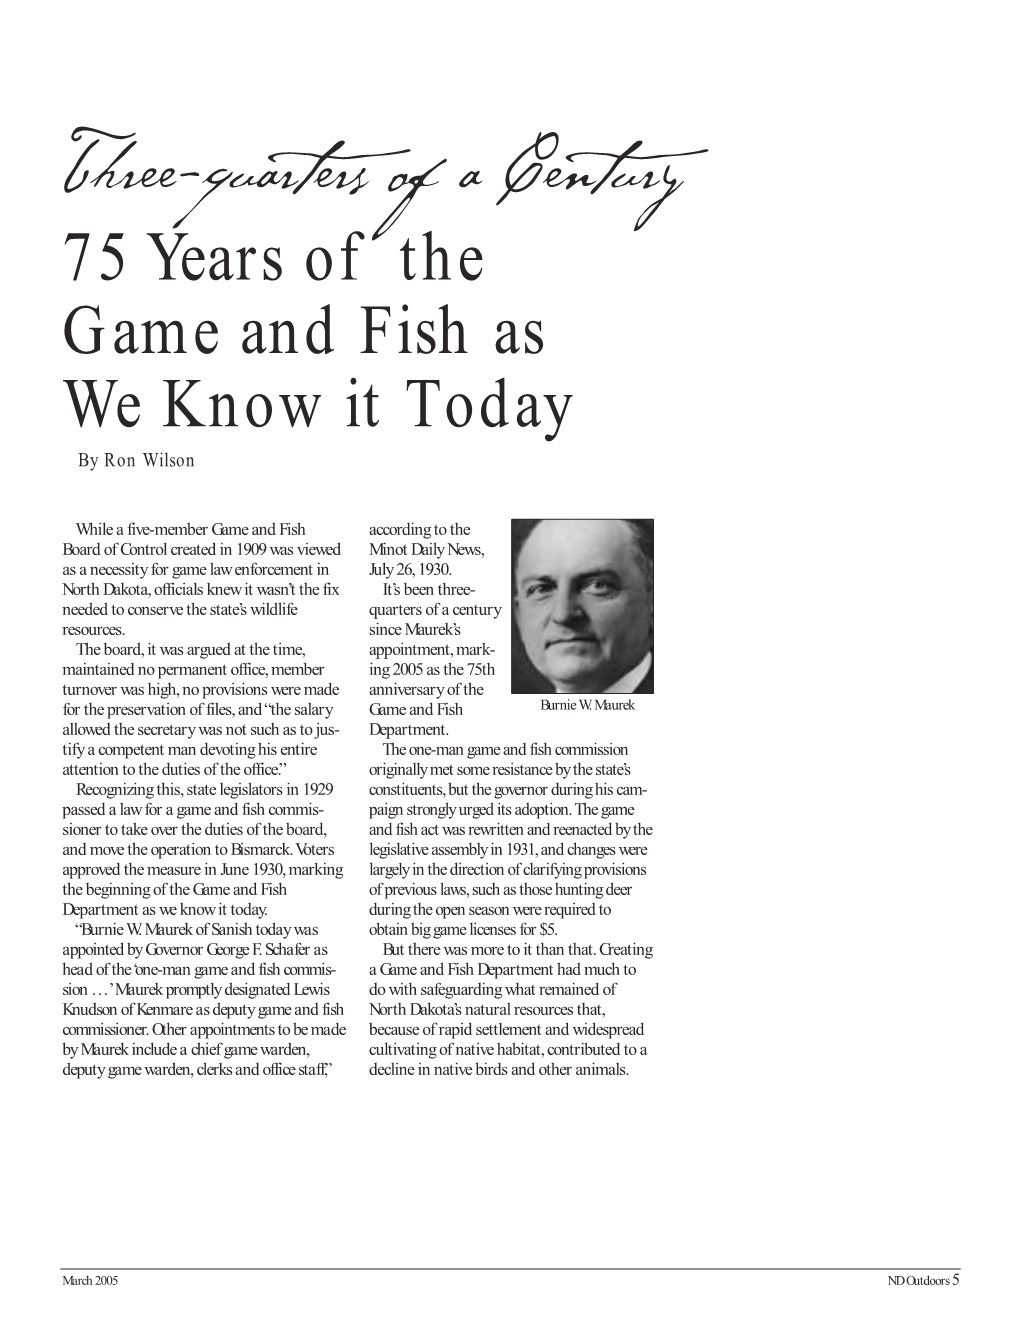 75 Years of the Game and Fish As We Know It Today by Ron Wilson